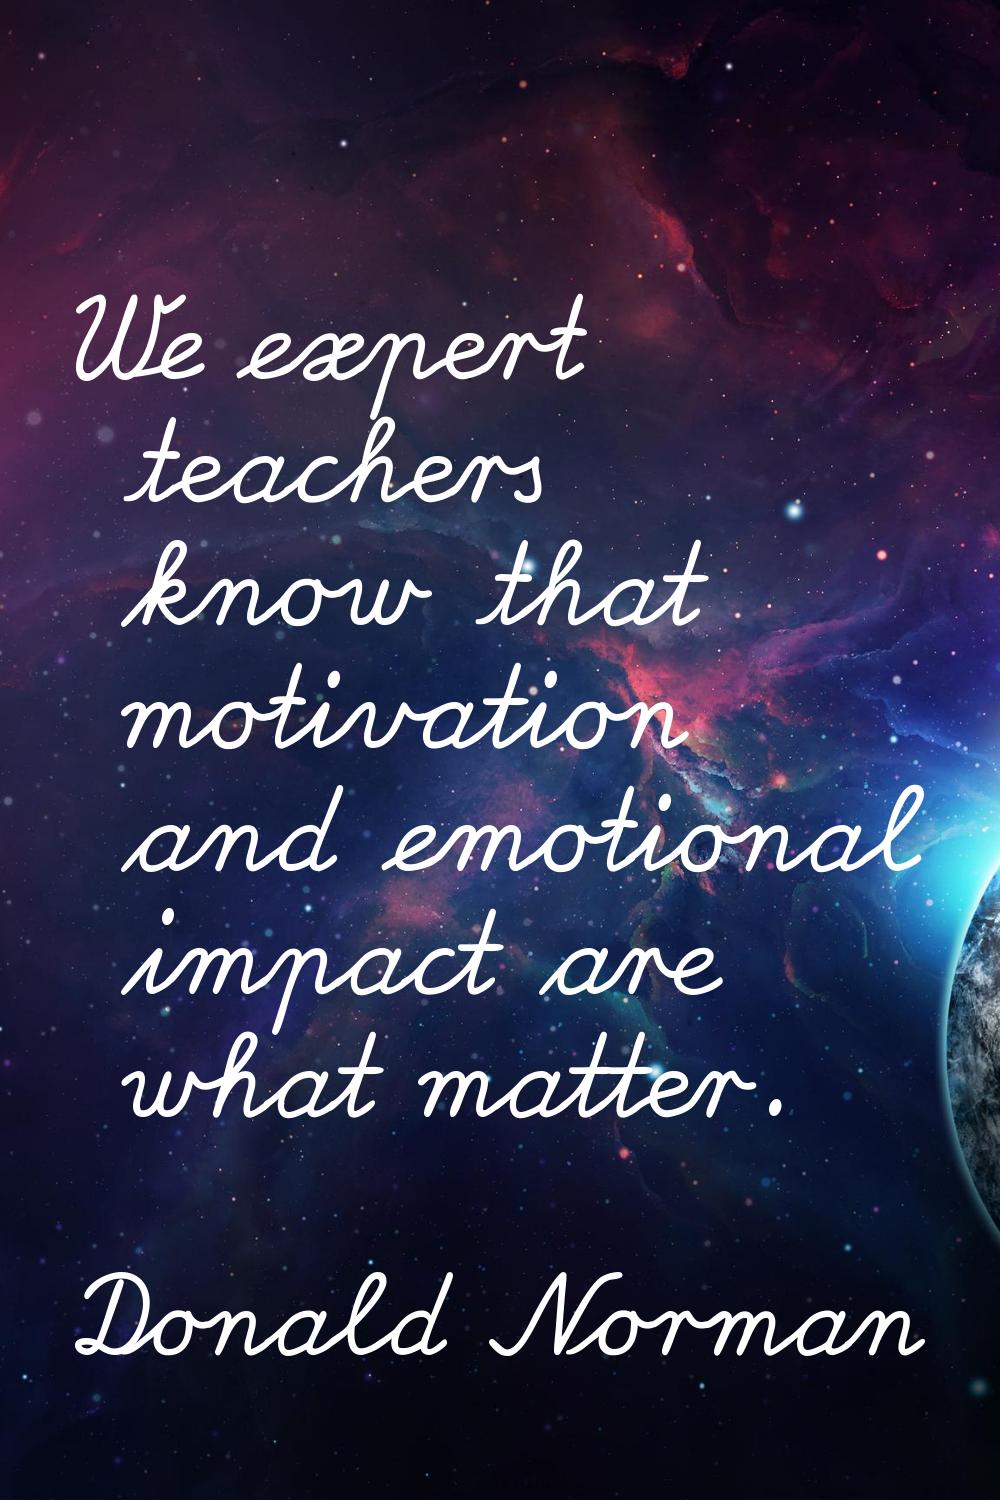 We expert teachers know that motivation and emotional impact are what matter.